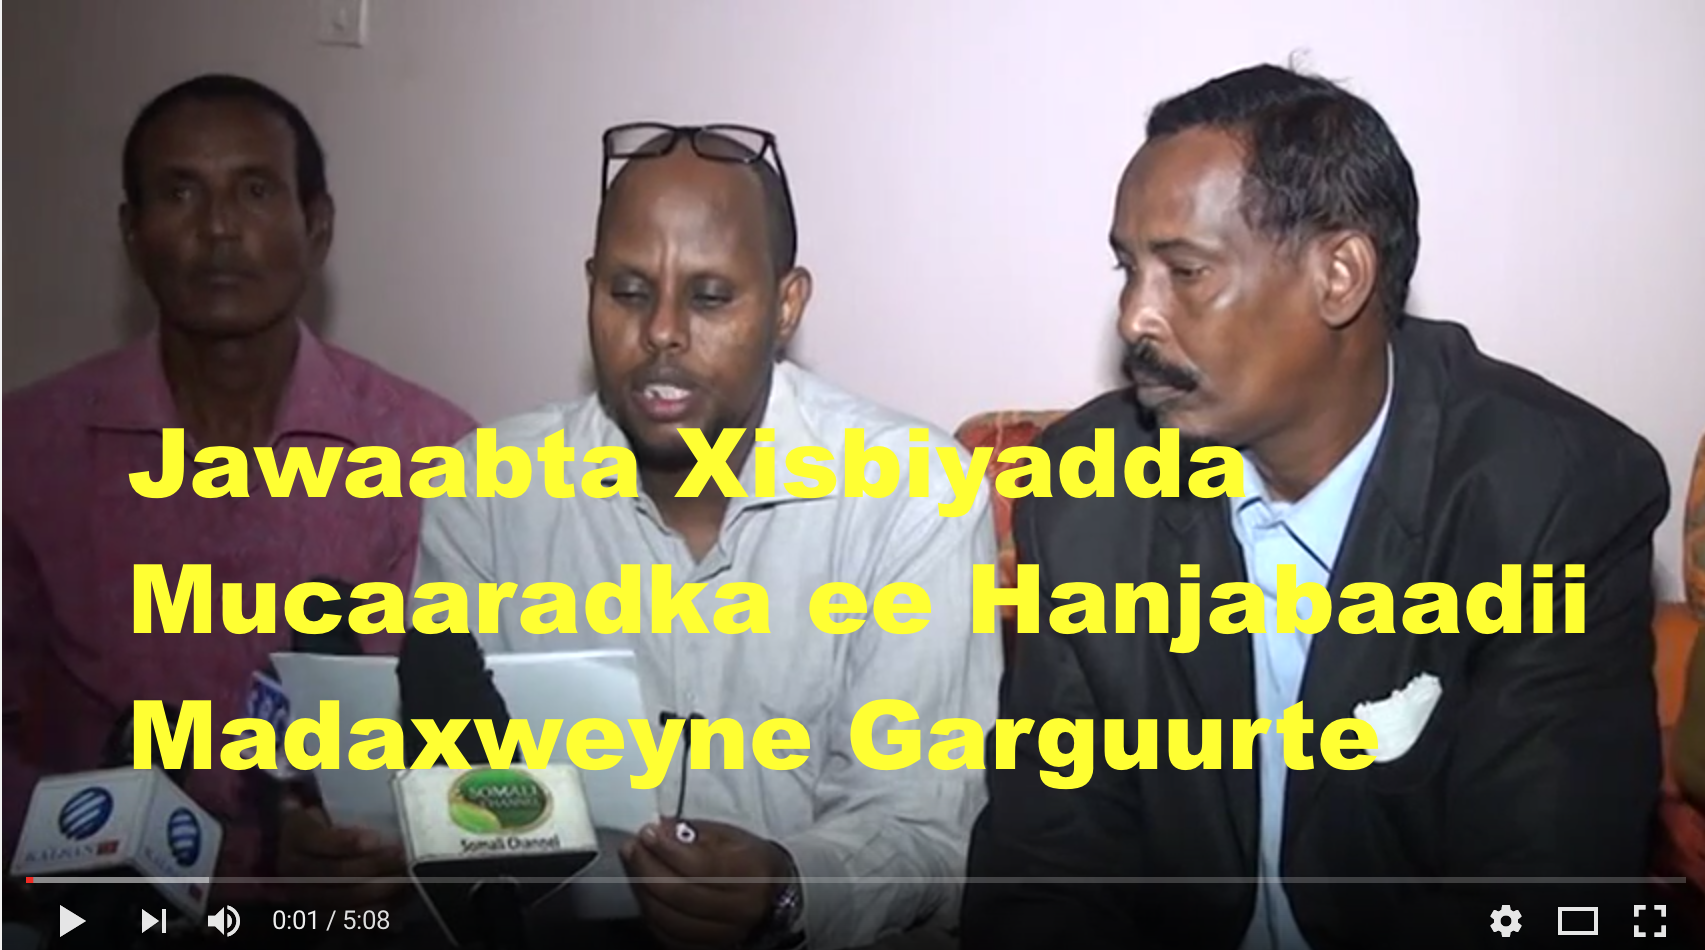 Somali President called the Opposition the nation's enemy after Al-Shabaab